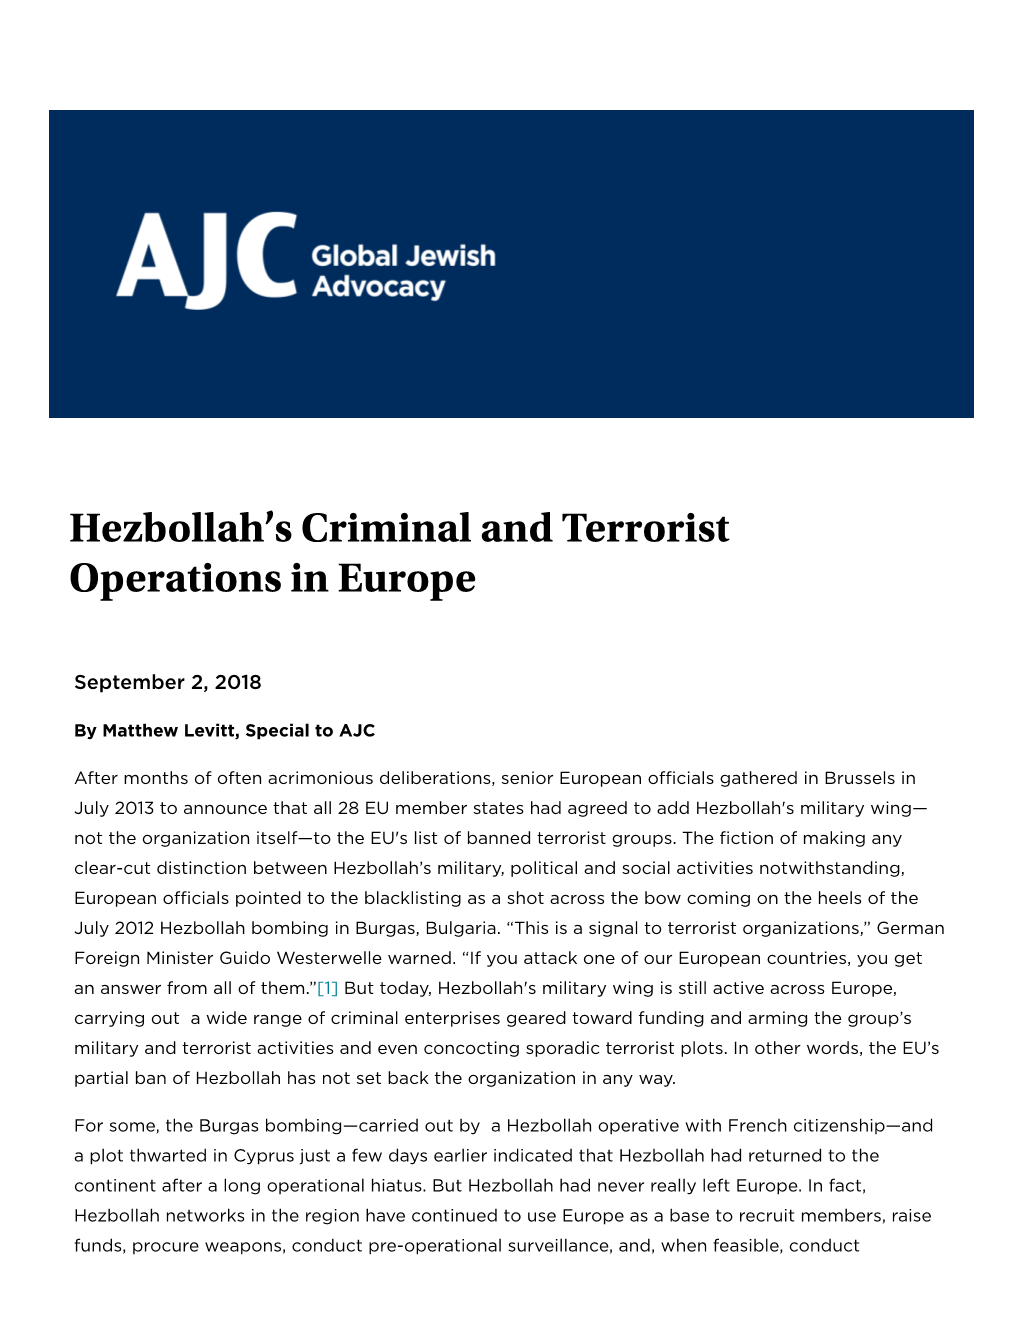 Hezbollah's Criminal and Terrorist Operations in Europe